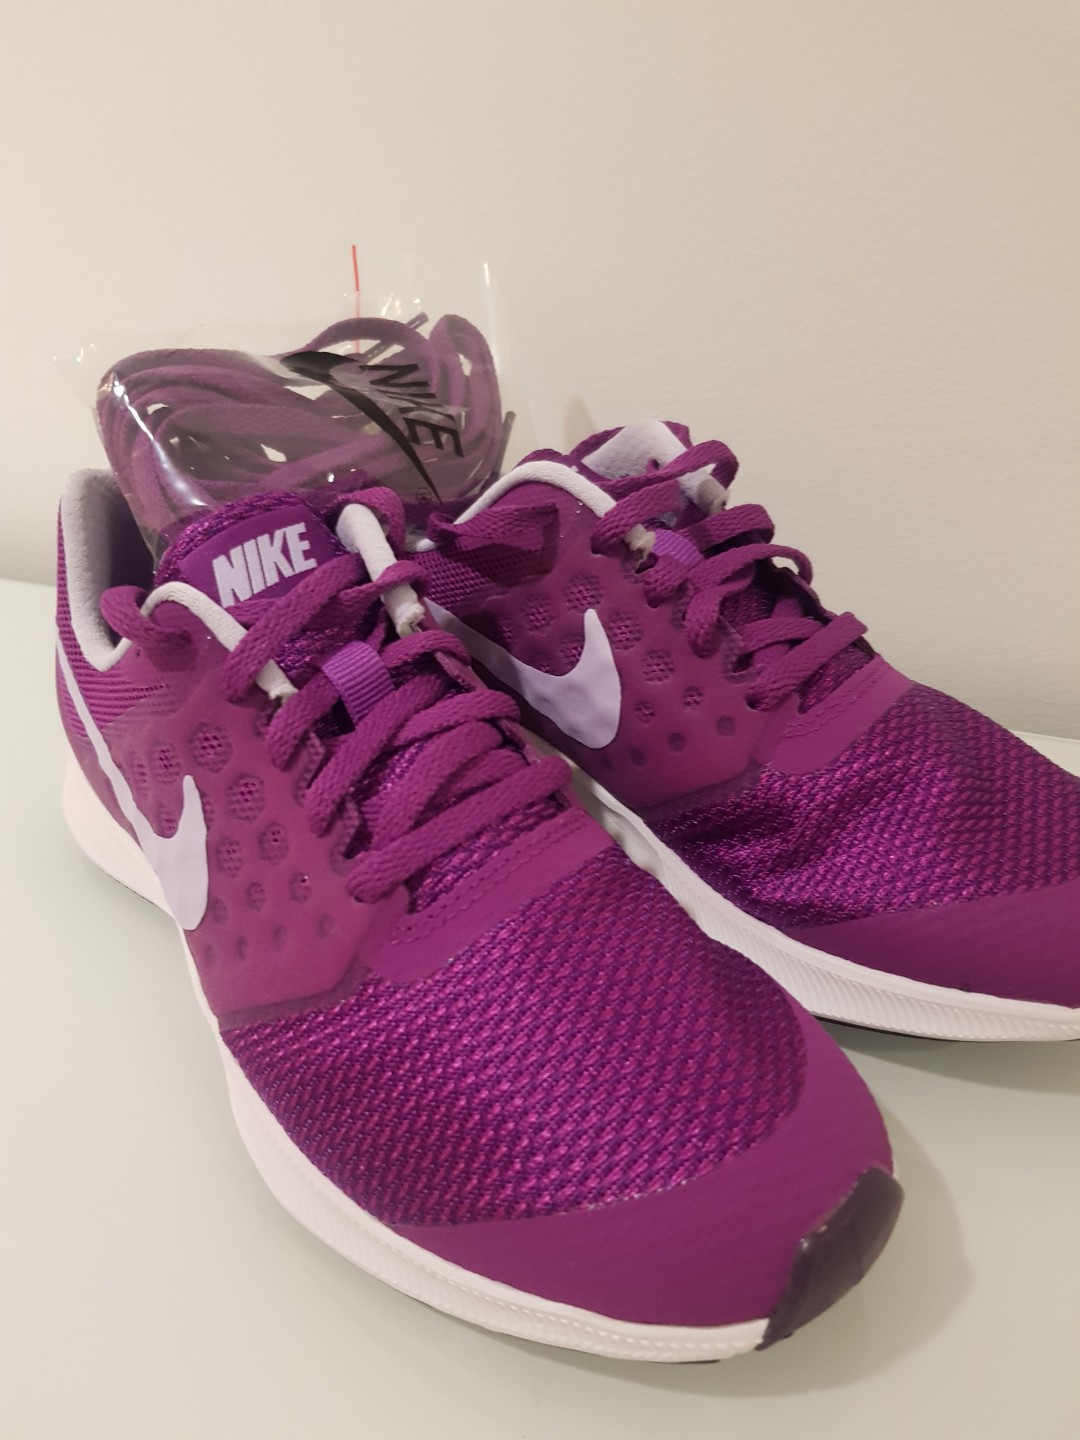 Girls 100% Authentic Nike Purple shoes 